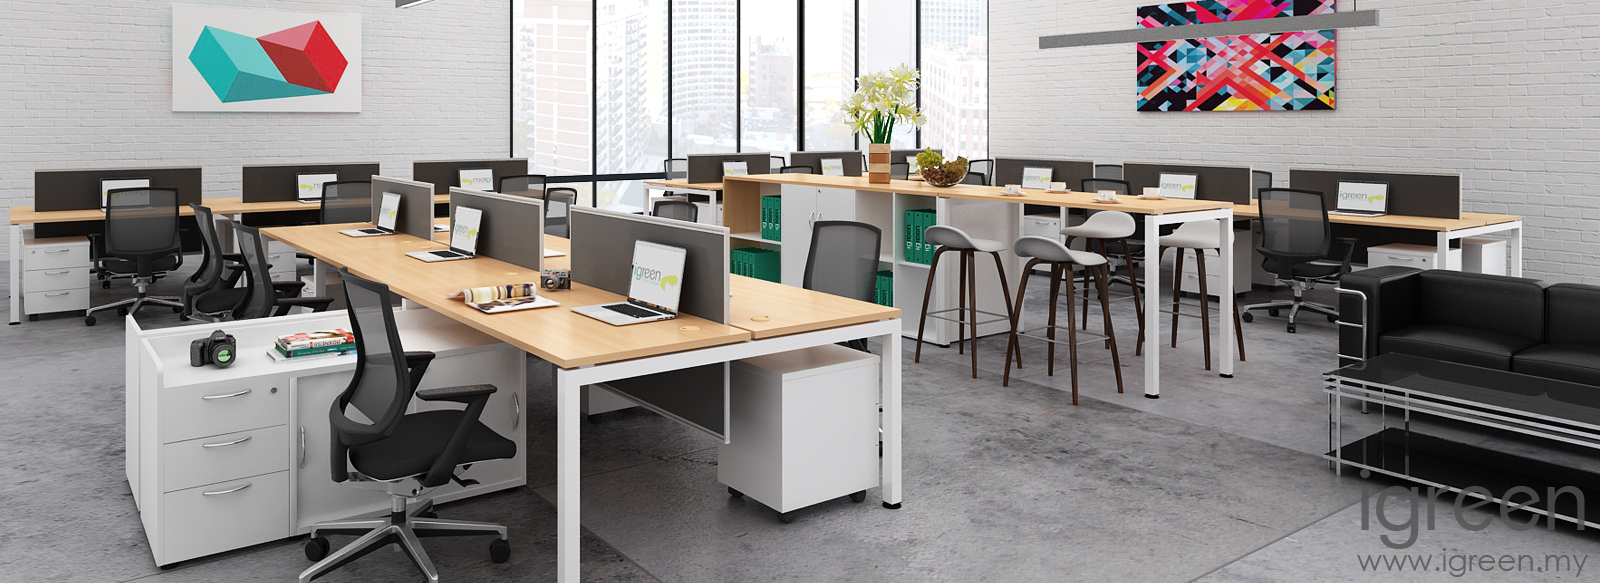 One Series Open Plan Working Environment 